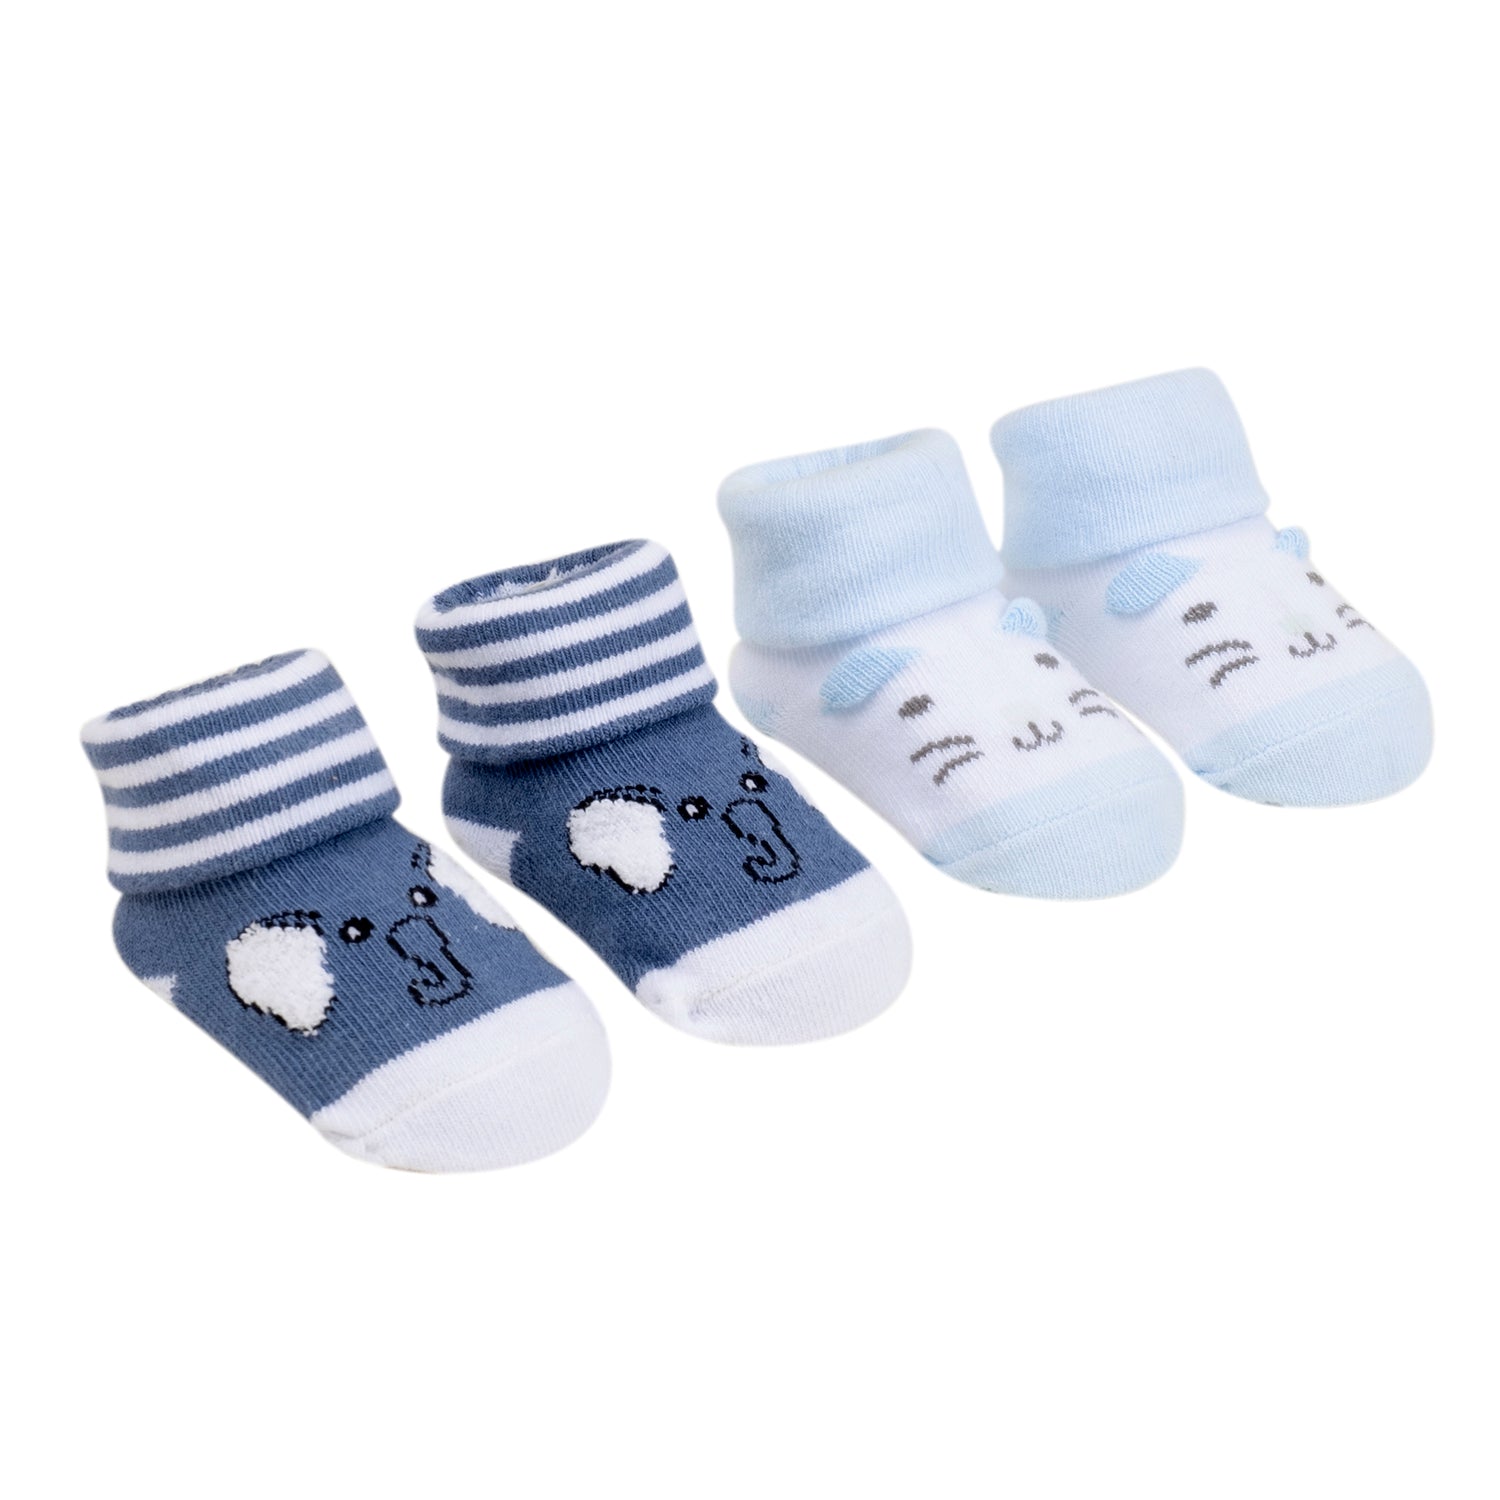 Baby Moo 3D Elephant Kitty Cotton Ankle Length Infant Dress Up Walking Set of 2 Socks Booties - Blue